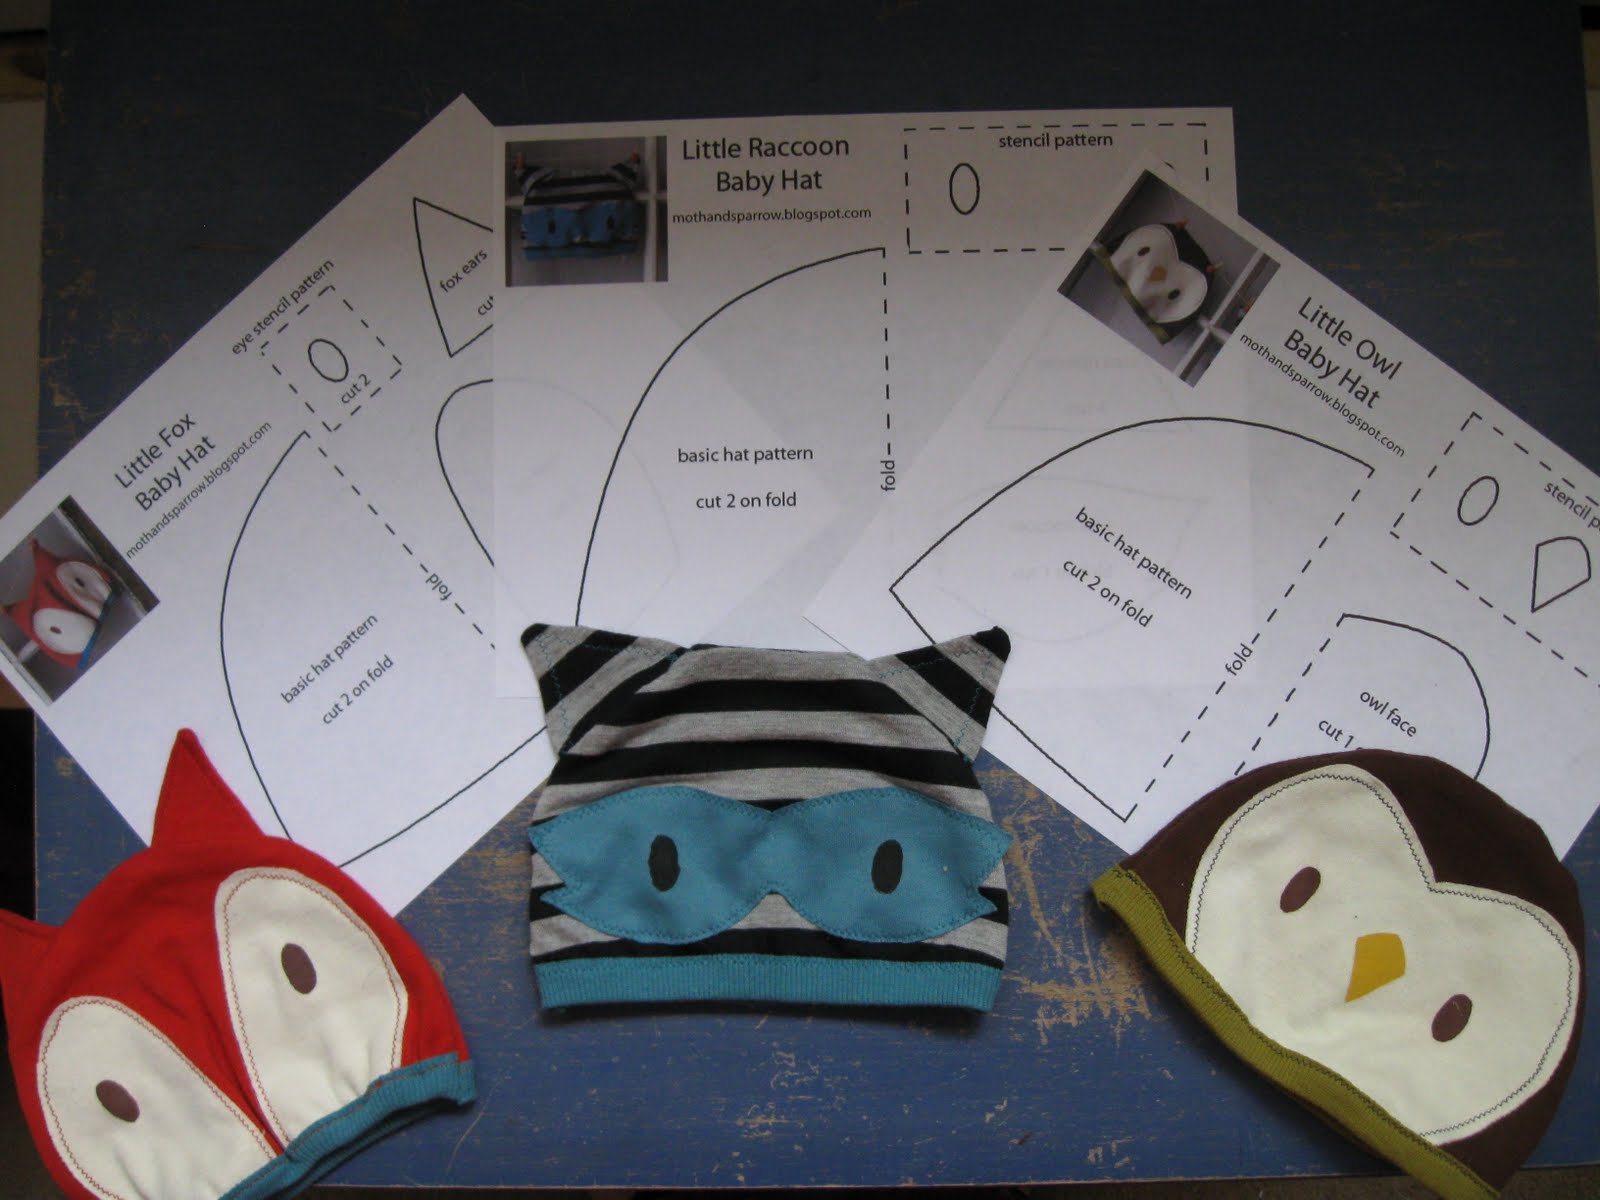 Baby and Preemie patterns